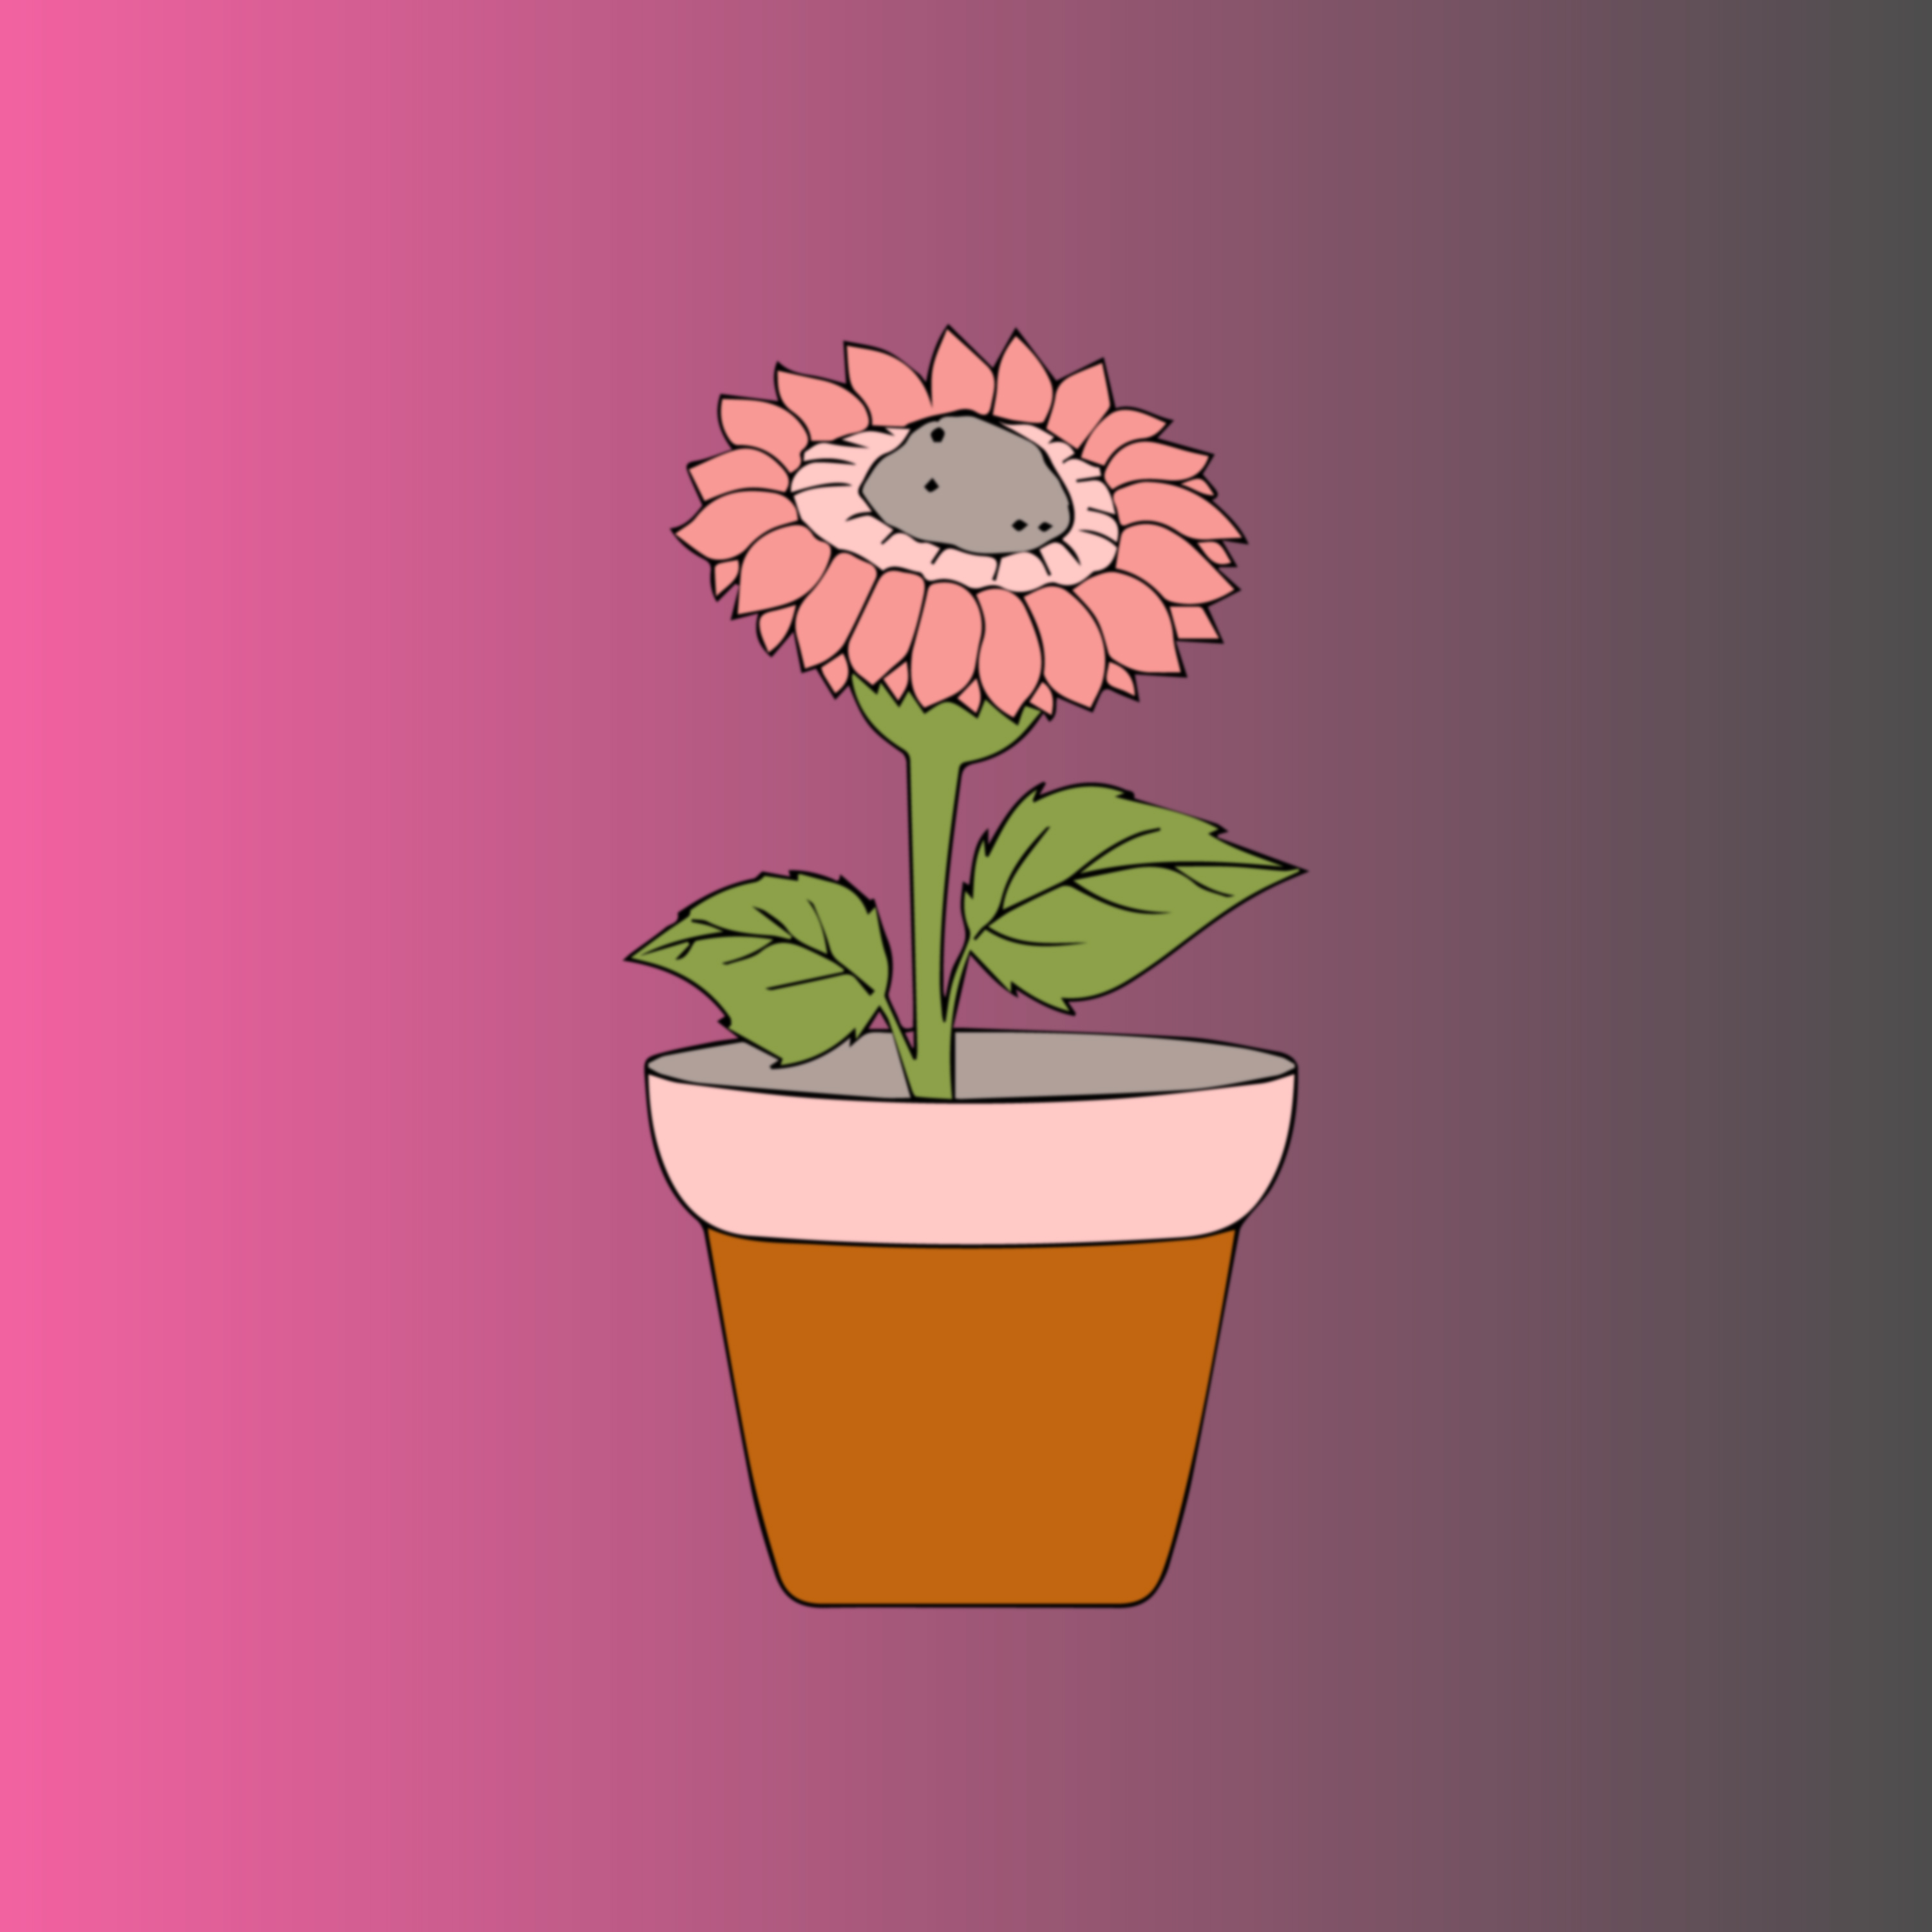 Flower in a pot on a pink background.